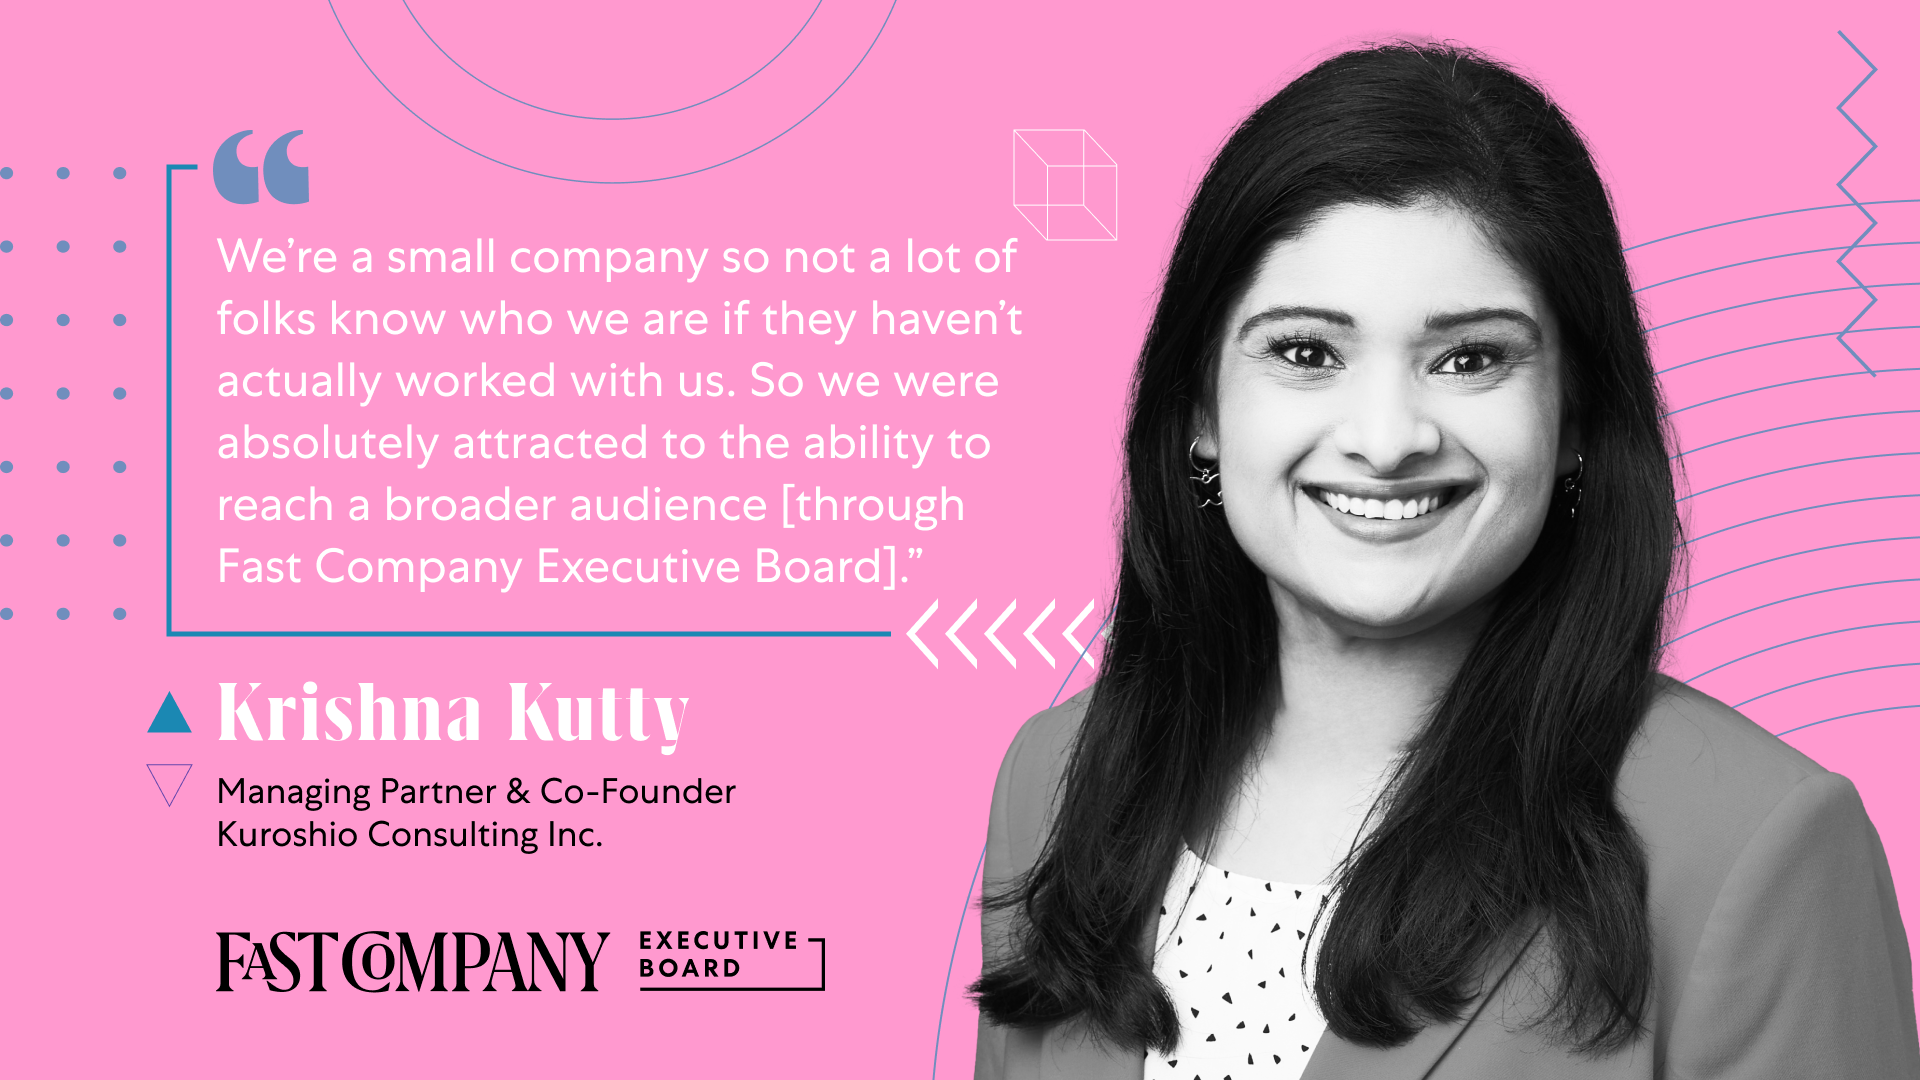 Through Fast Company Executive Board, Krishna Kutty Reaches a Wider Audience for Thought Leadership